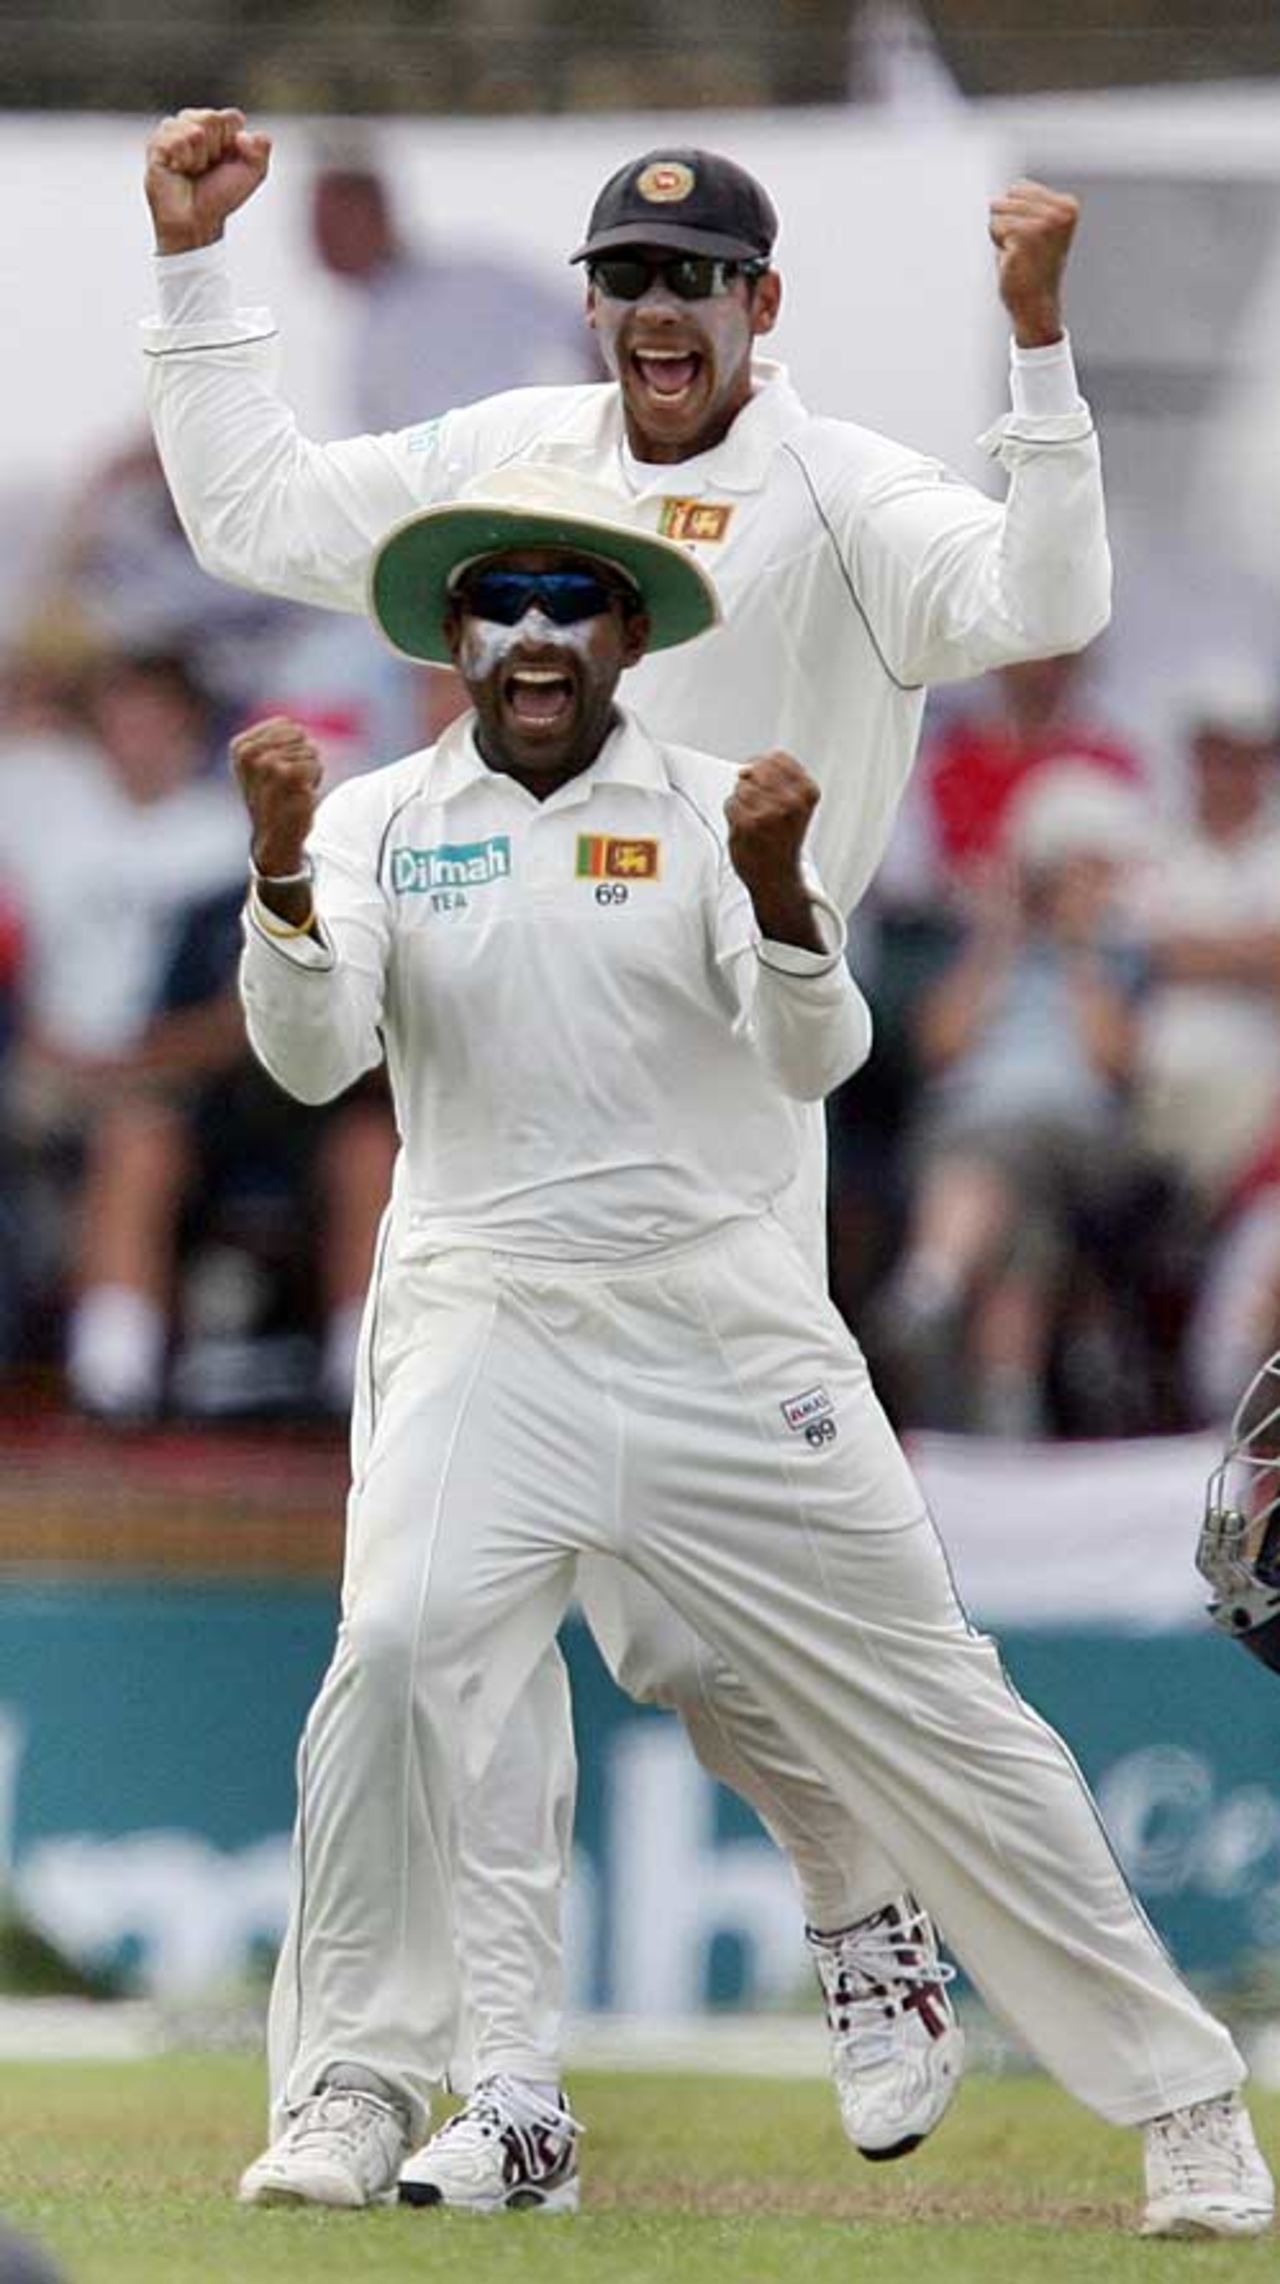 Mahela Jayawardene celebrates his work to complete the run out, Sri Lanka v England, 3rd Test, Galle, 5th day, December 22 2007